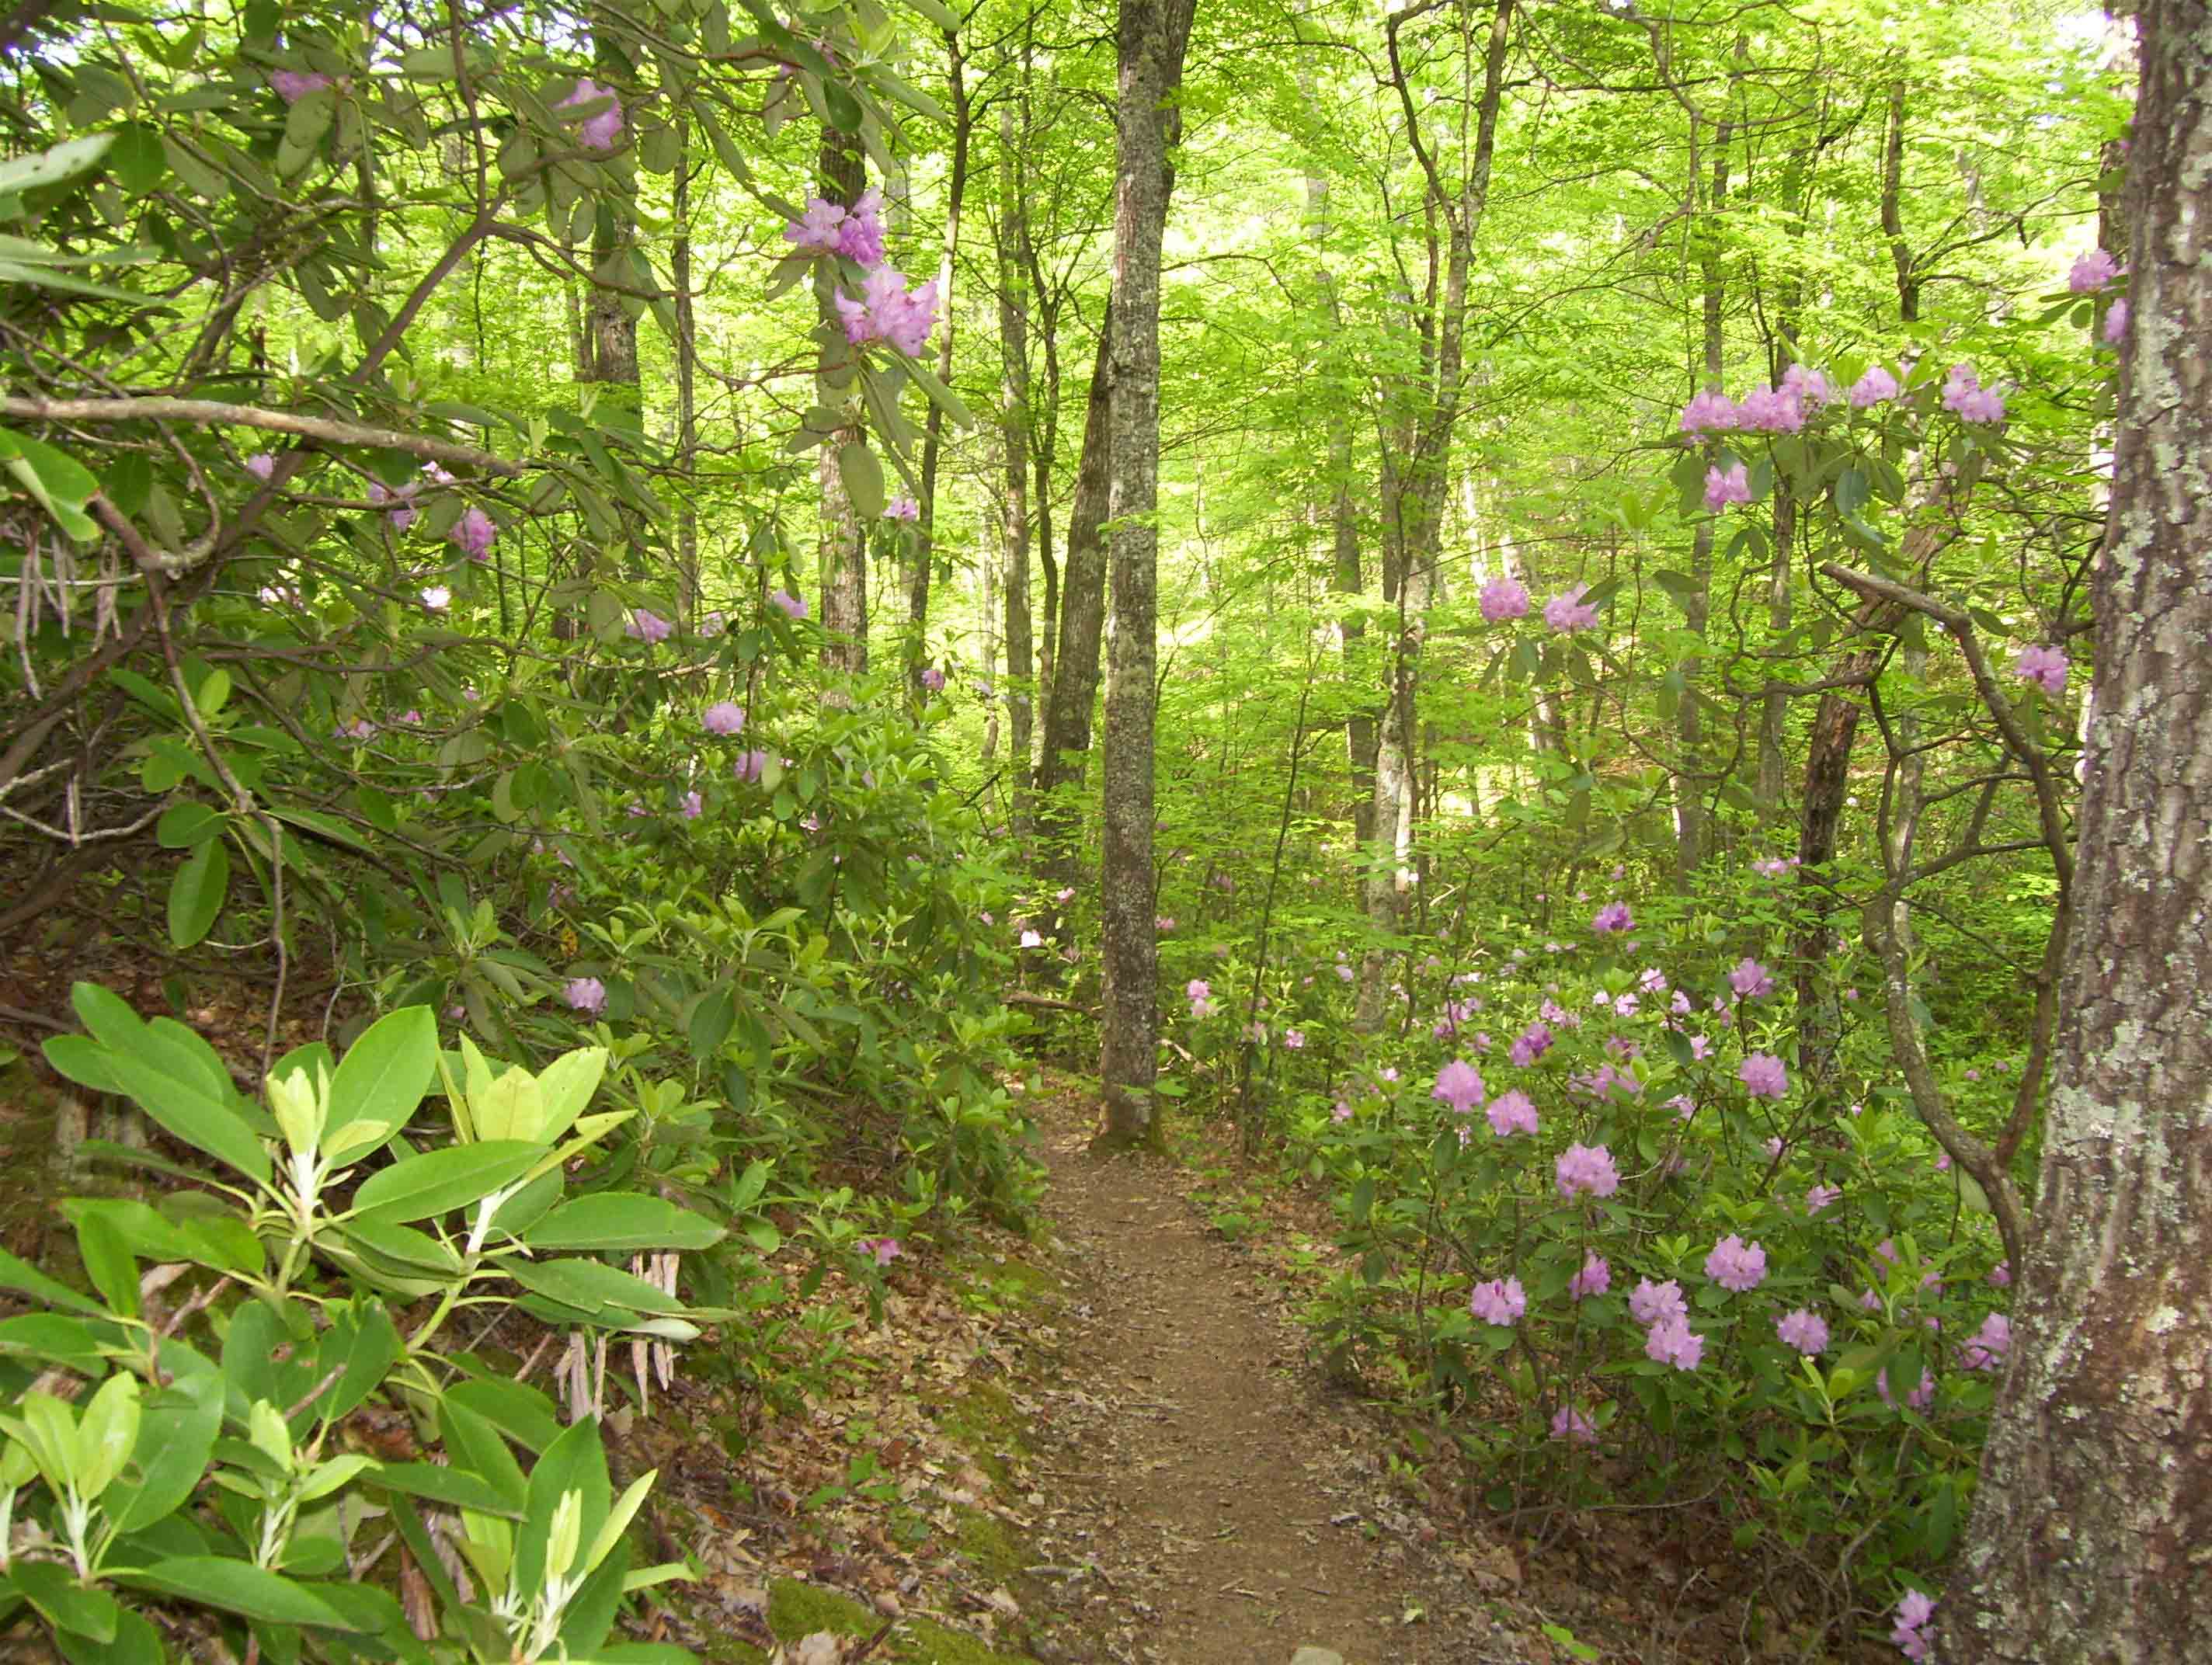 Trail as it passes through a rhododendron thicket at approx. mm 11.3.  Courtesy dlcul@conncoll.edu